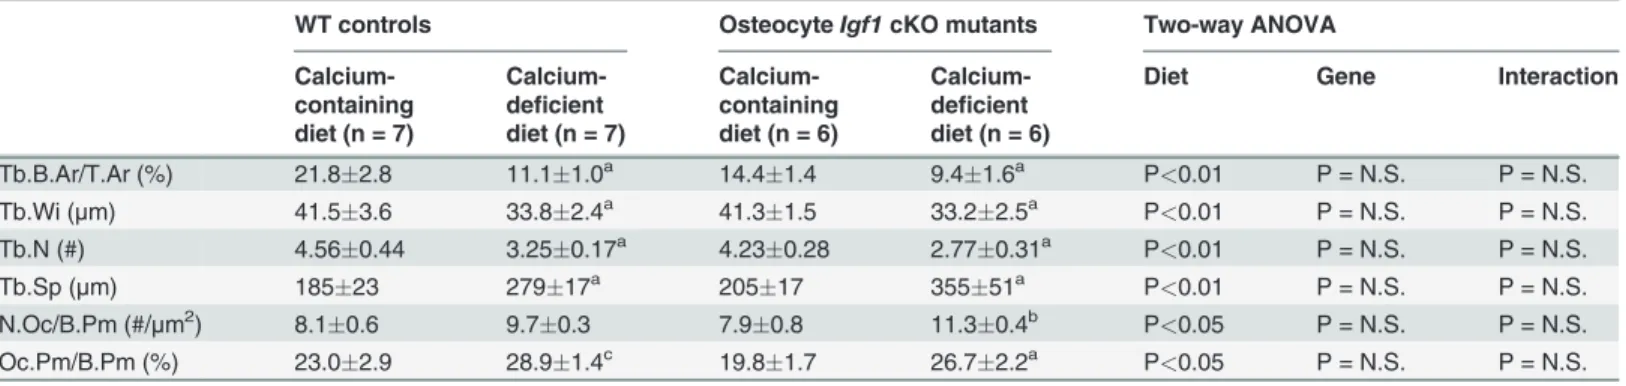 Table 3. Effects of the two-week dietary calcium depletion on static bone histomorphometric parameters of trabecular bone at the secondary spongiosia of the distal femur.